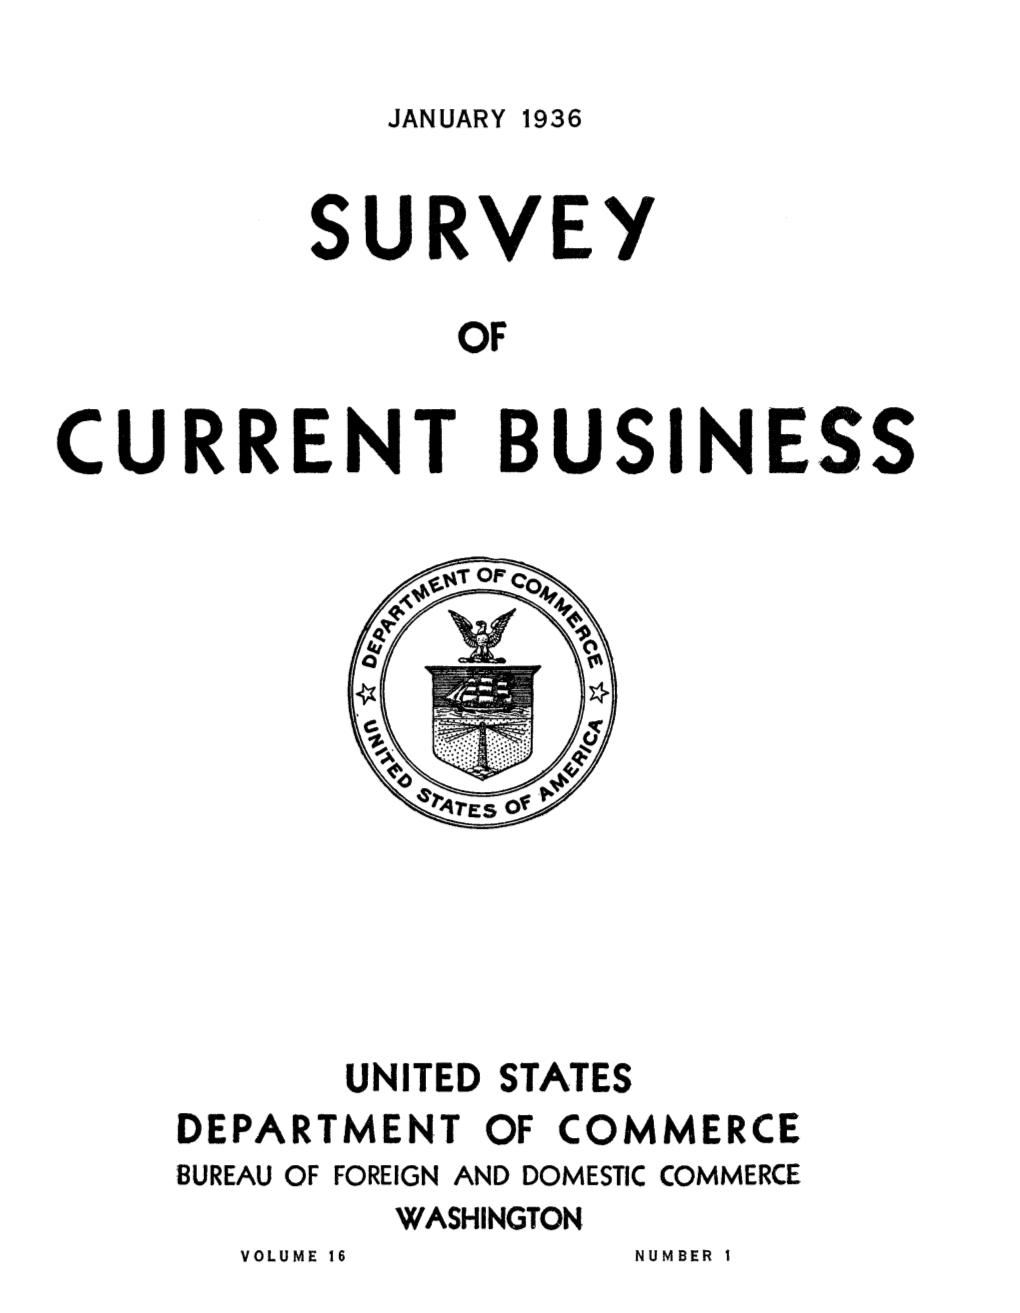 SURVEY of CURRENT BUSINESS January 1936